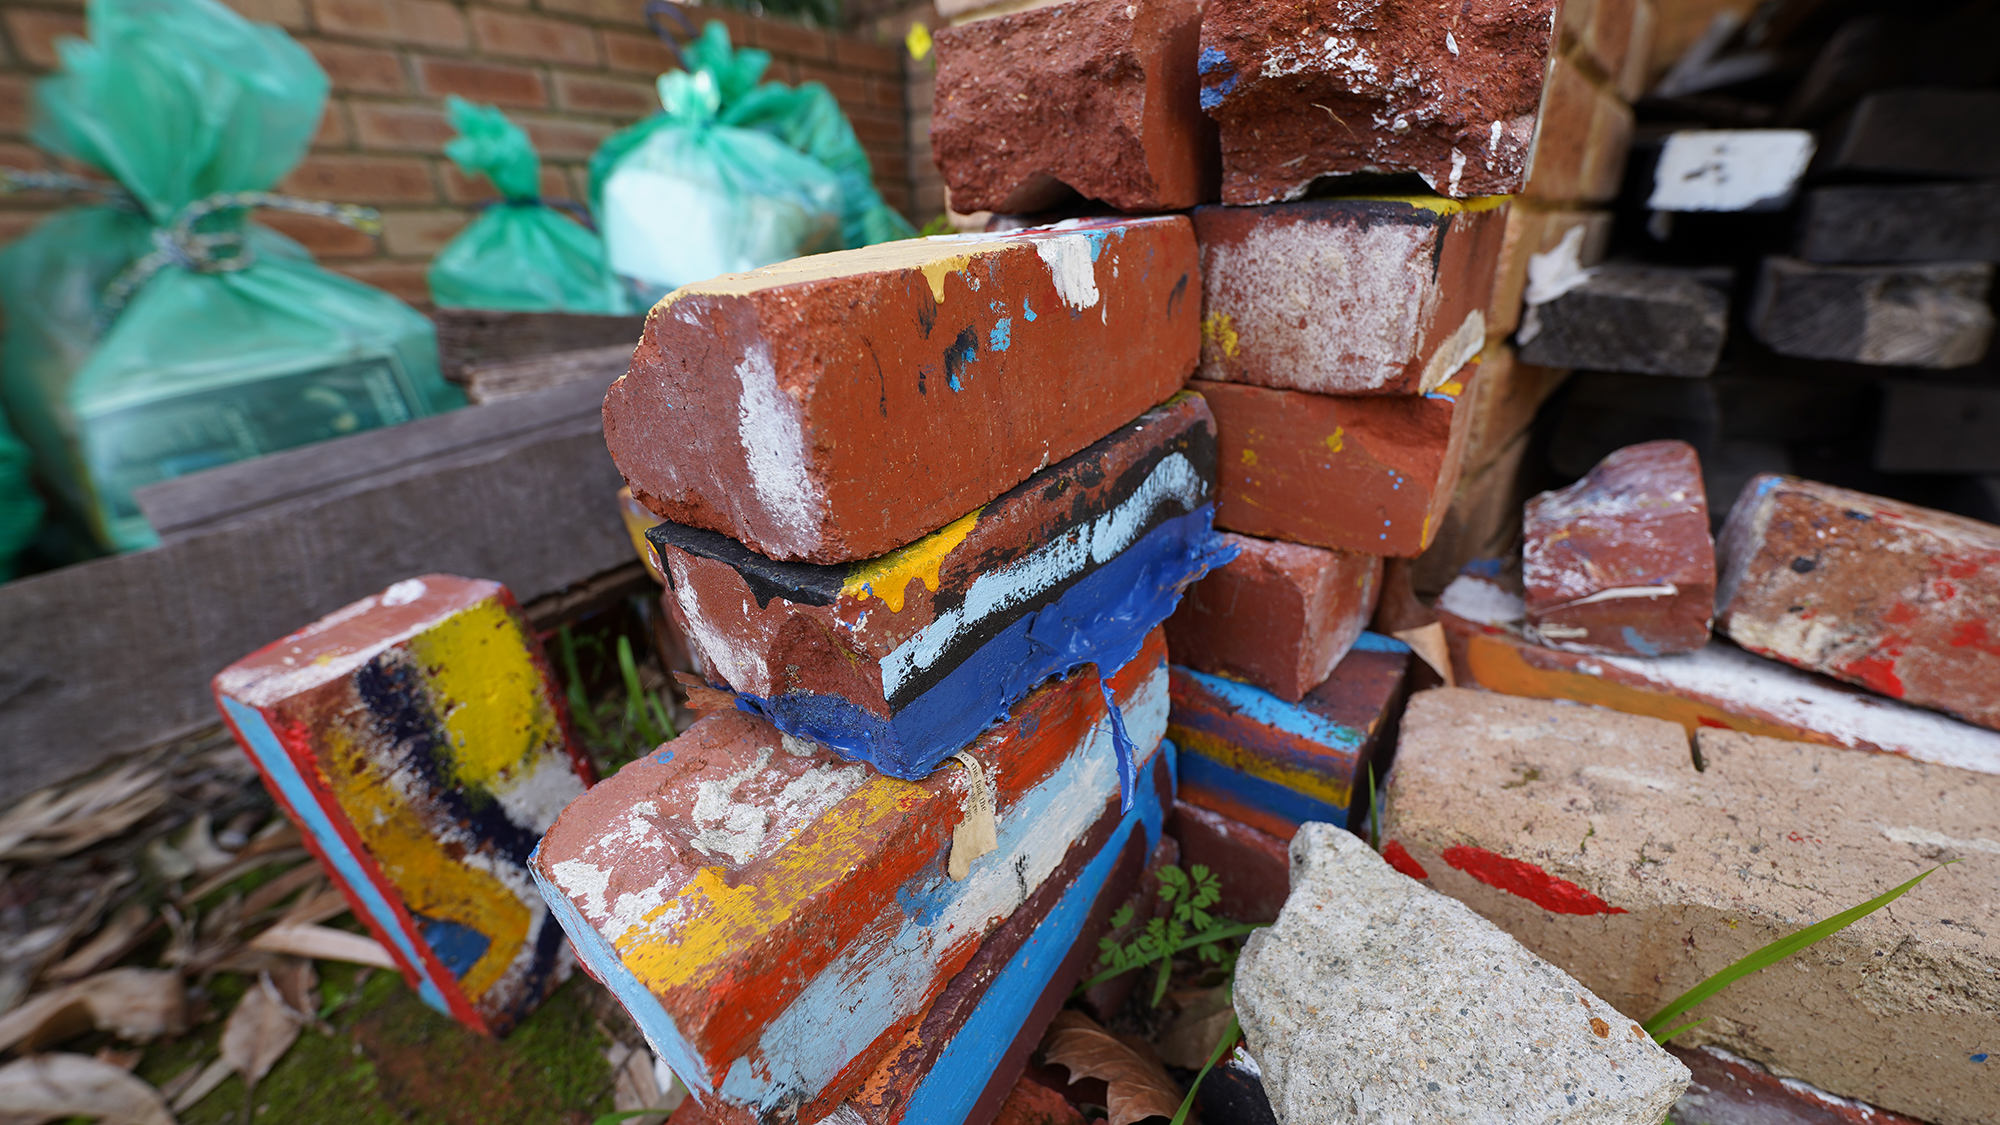 Photograph of a stack of painted bricks piled upon each other with various items, including green plastic rubbish bags, depicted in the background